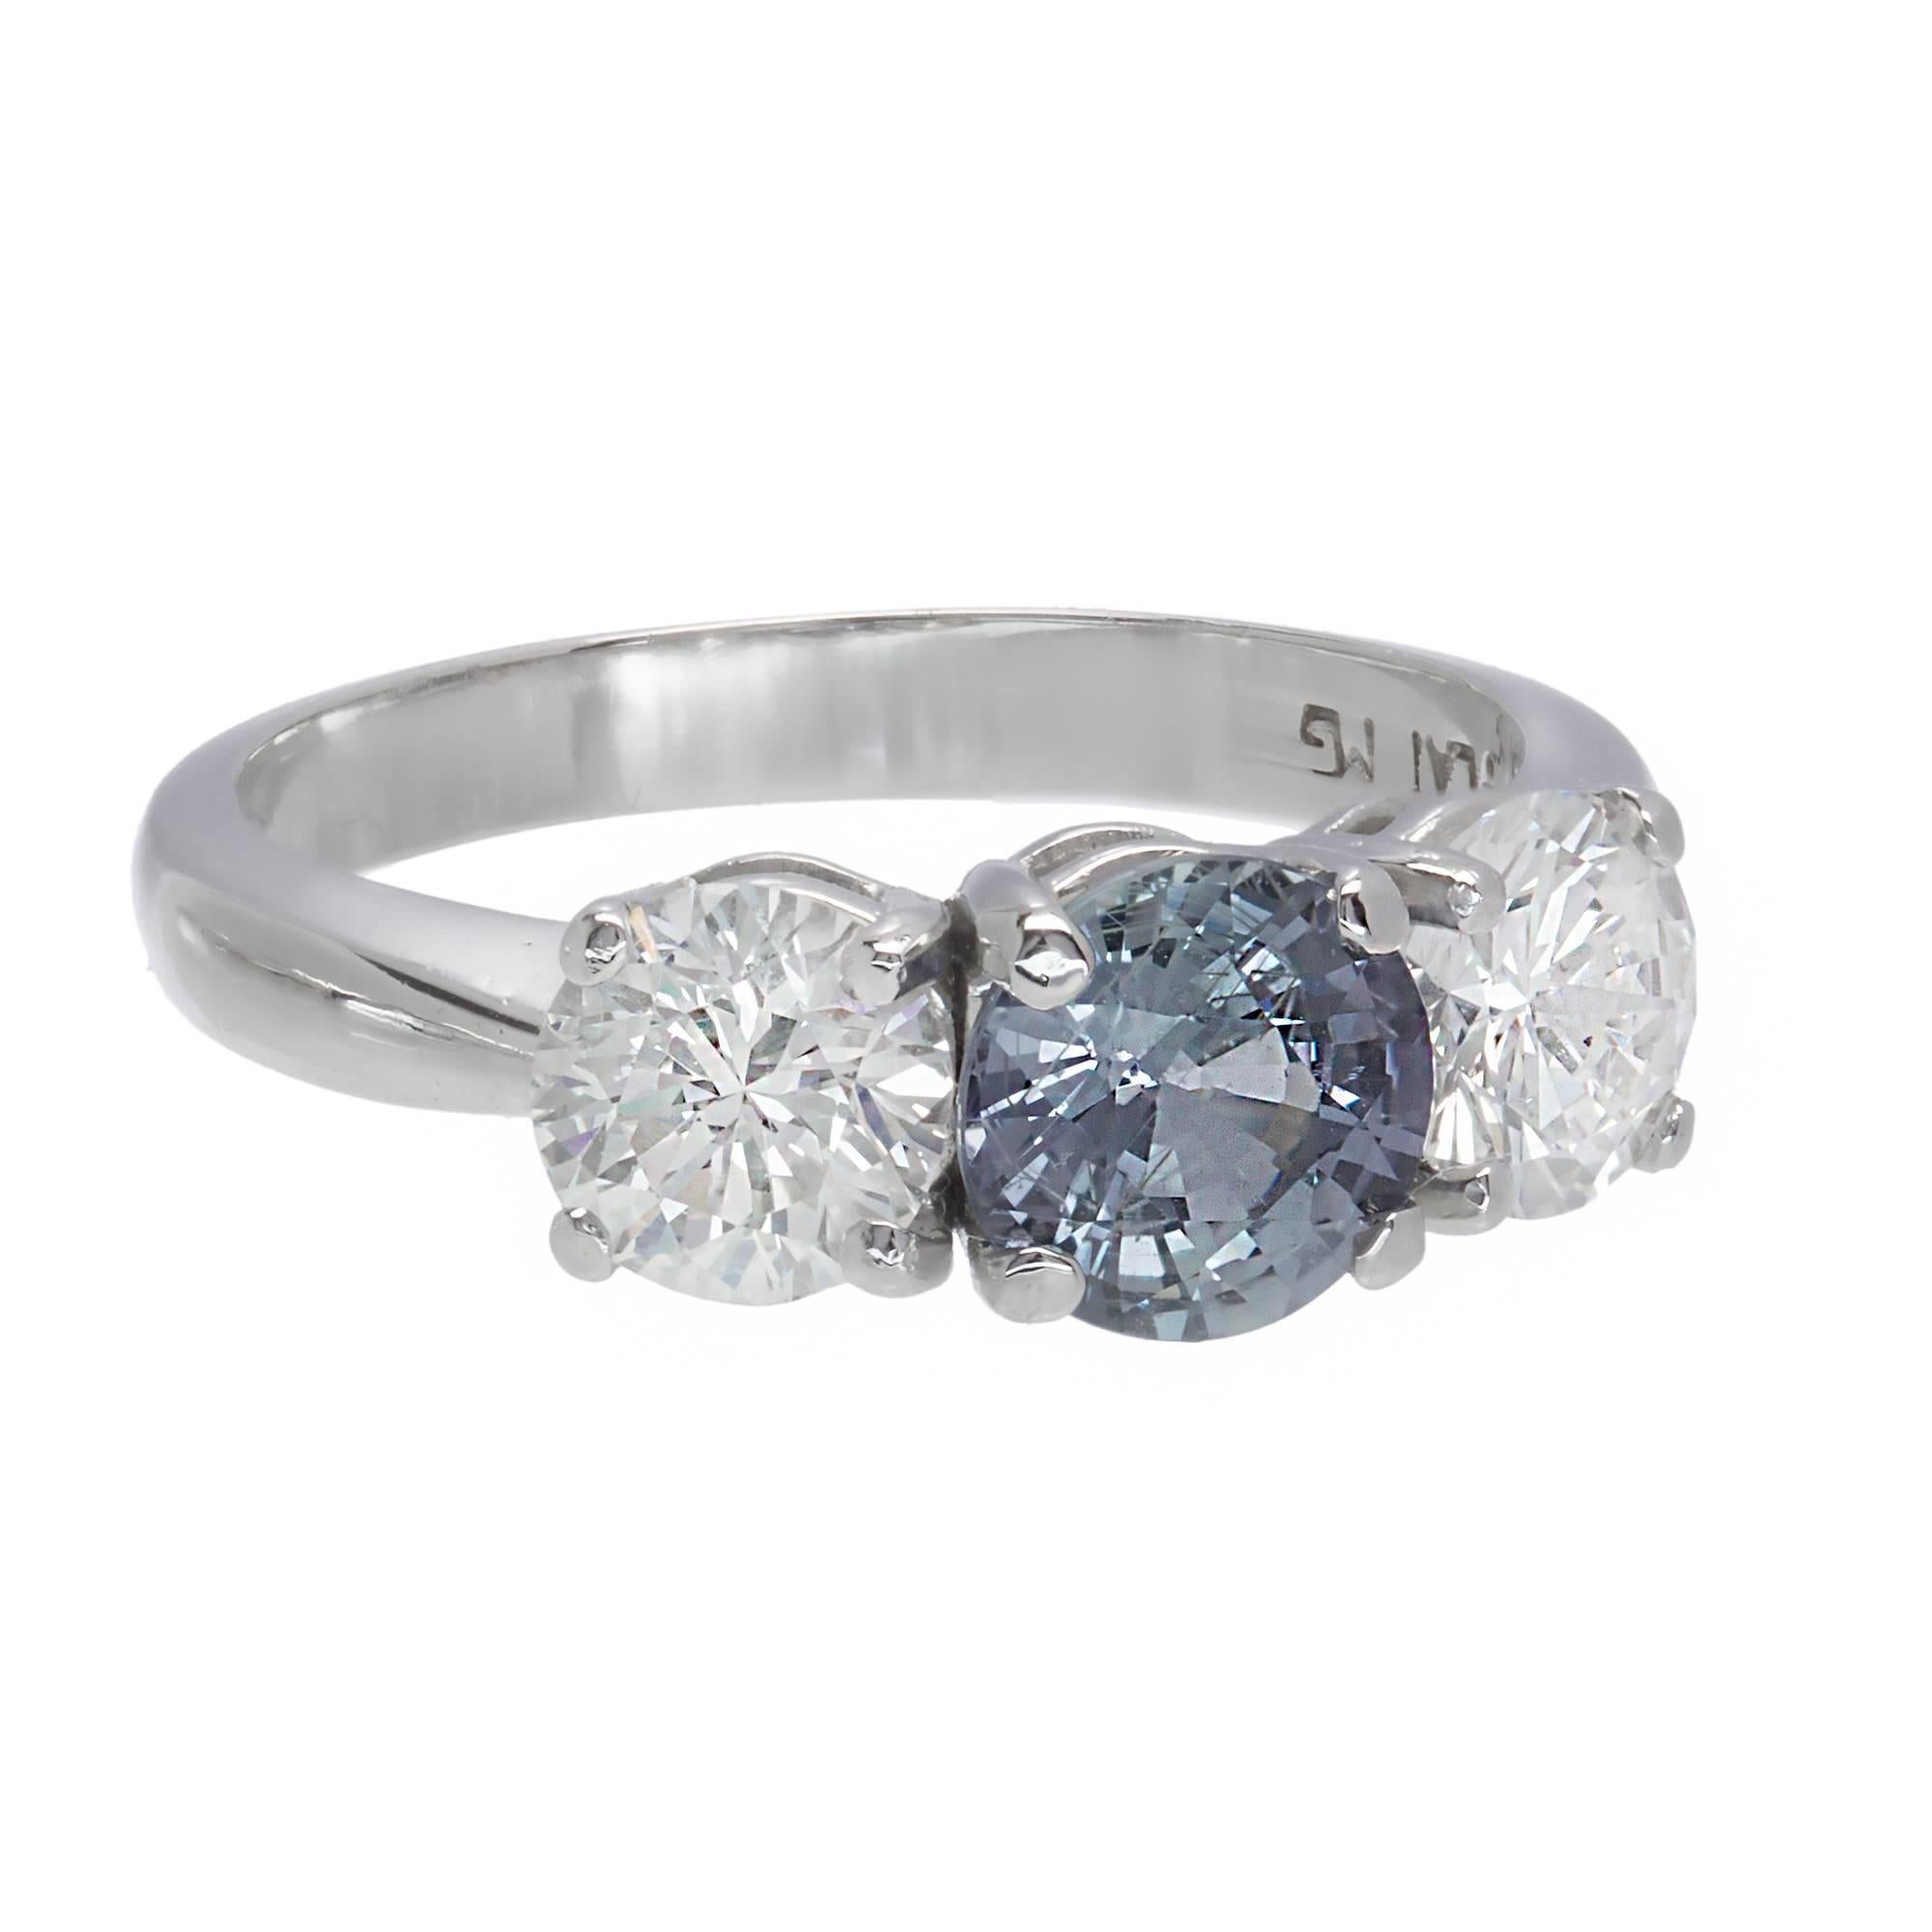 Peter Suchy GIA certified natural no heat color change Sapphire engagement ring. Sapphire changes color in different lights from grey blue to grey purple. Also, set with 2 round brilliant cut Diamonds in a three-stone platinum setting

1 round color